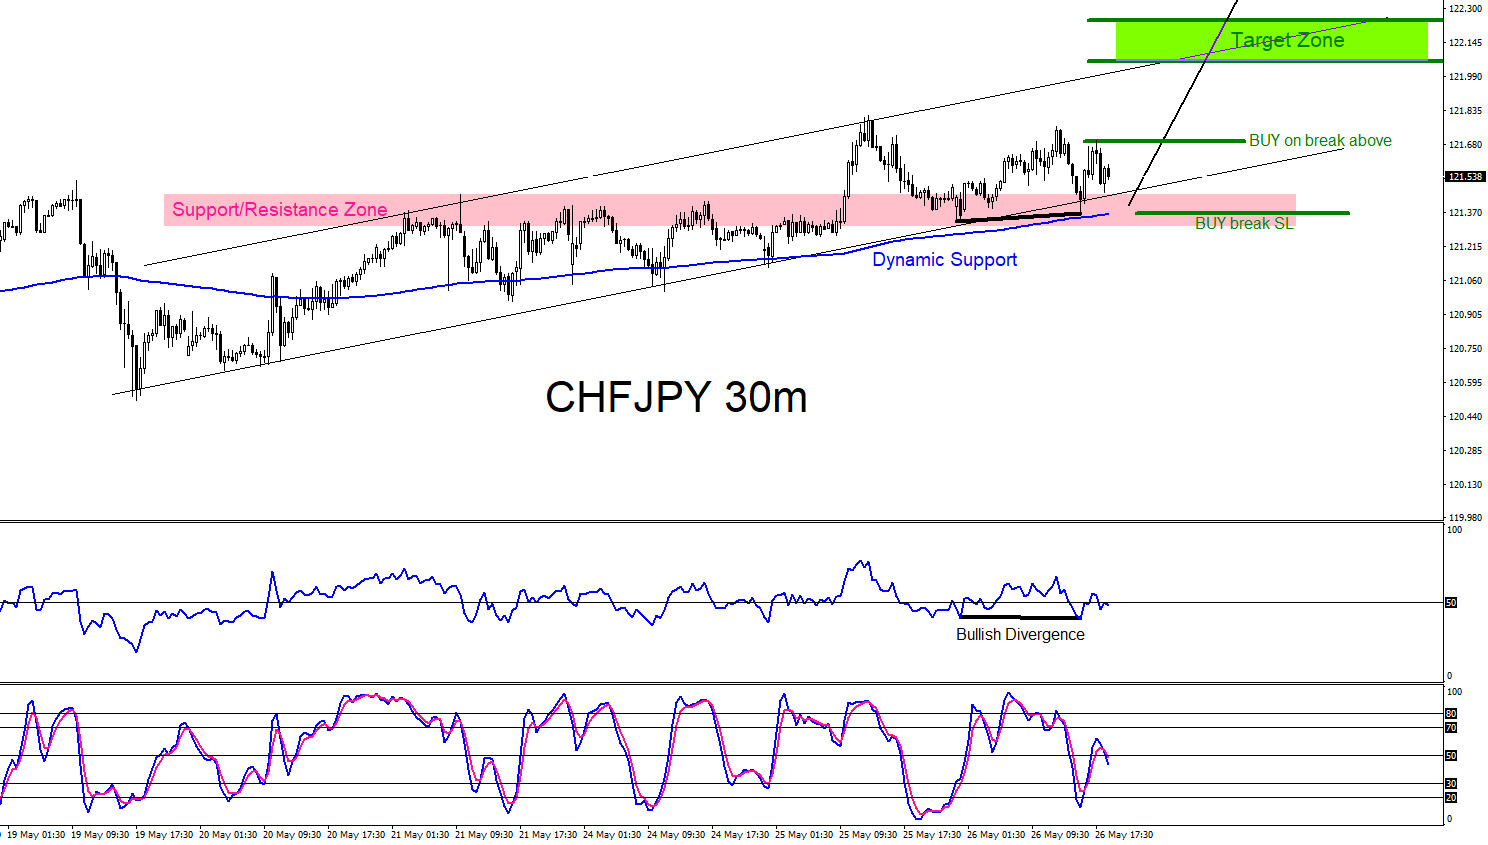 CHFJPY Moves Higher as Expected